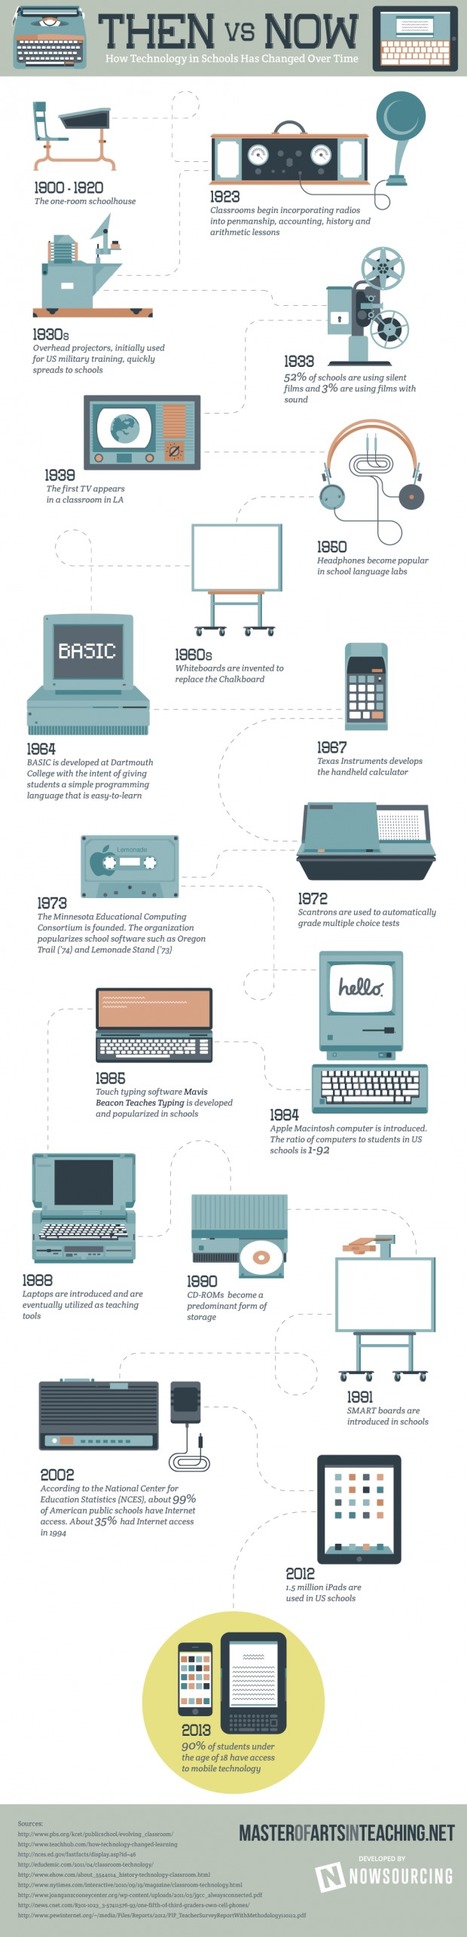 a nice timeline on how technology has been incorporated in schools [Infographic] | 21st Century Learning and Teaching | Scoop.it